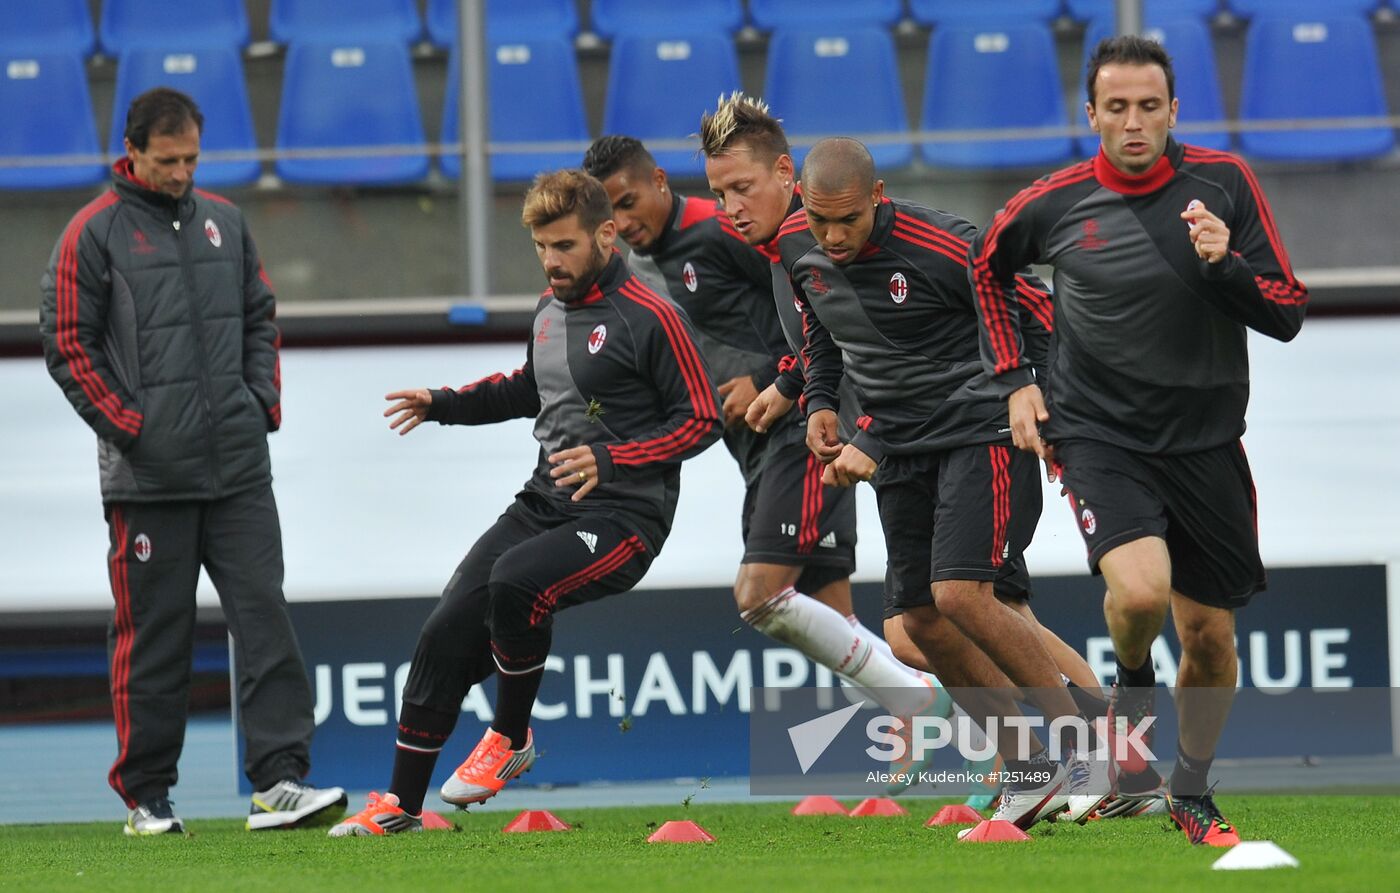 A.C. Milan holds training session